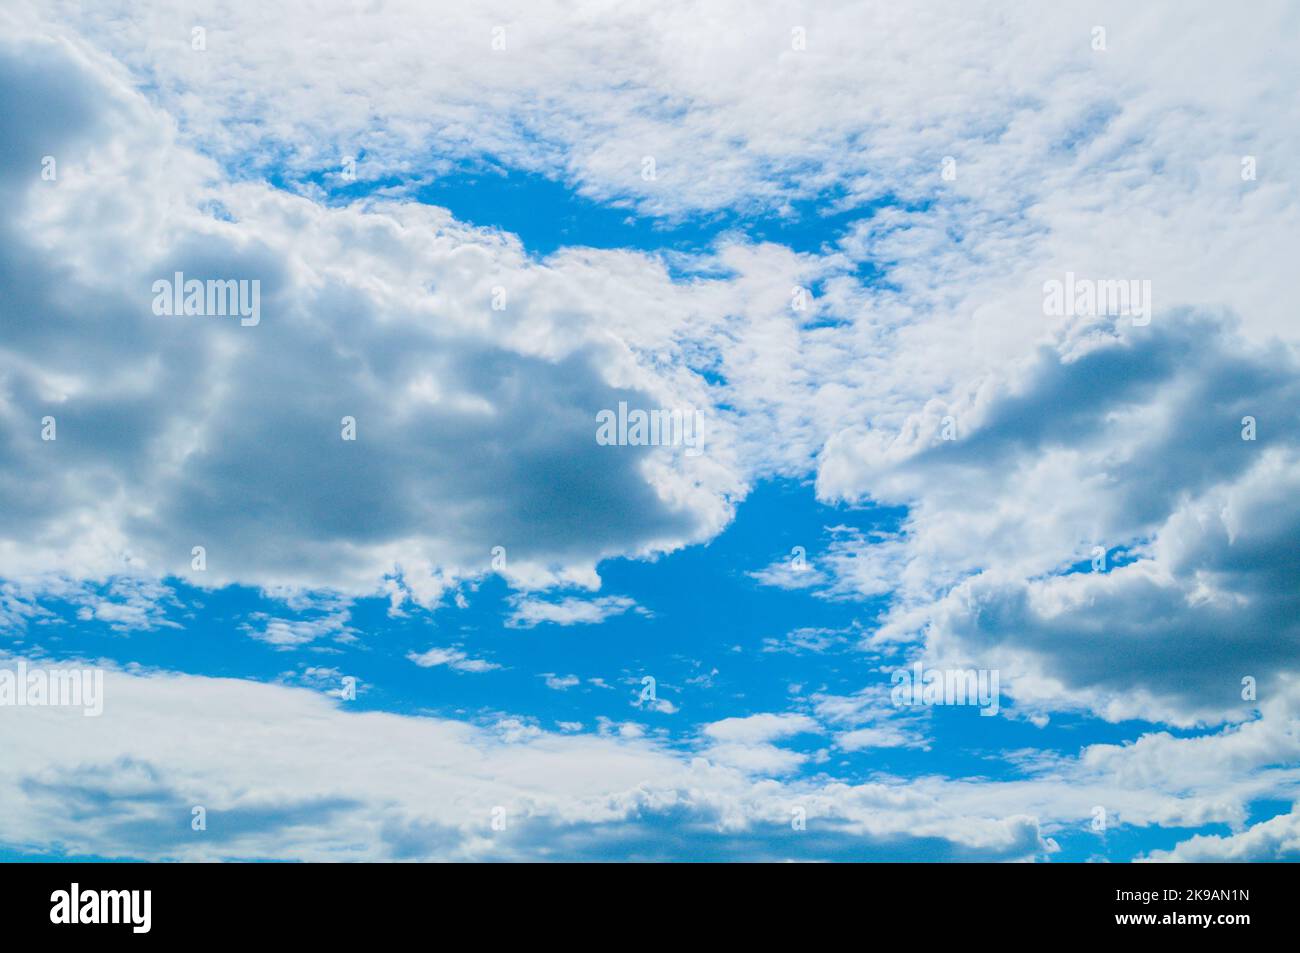 Sky background, picturesque dramatic sky landscape panoramic view with scenic fluffy clouds Stock Photo